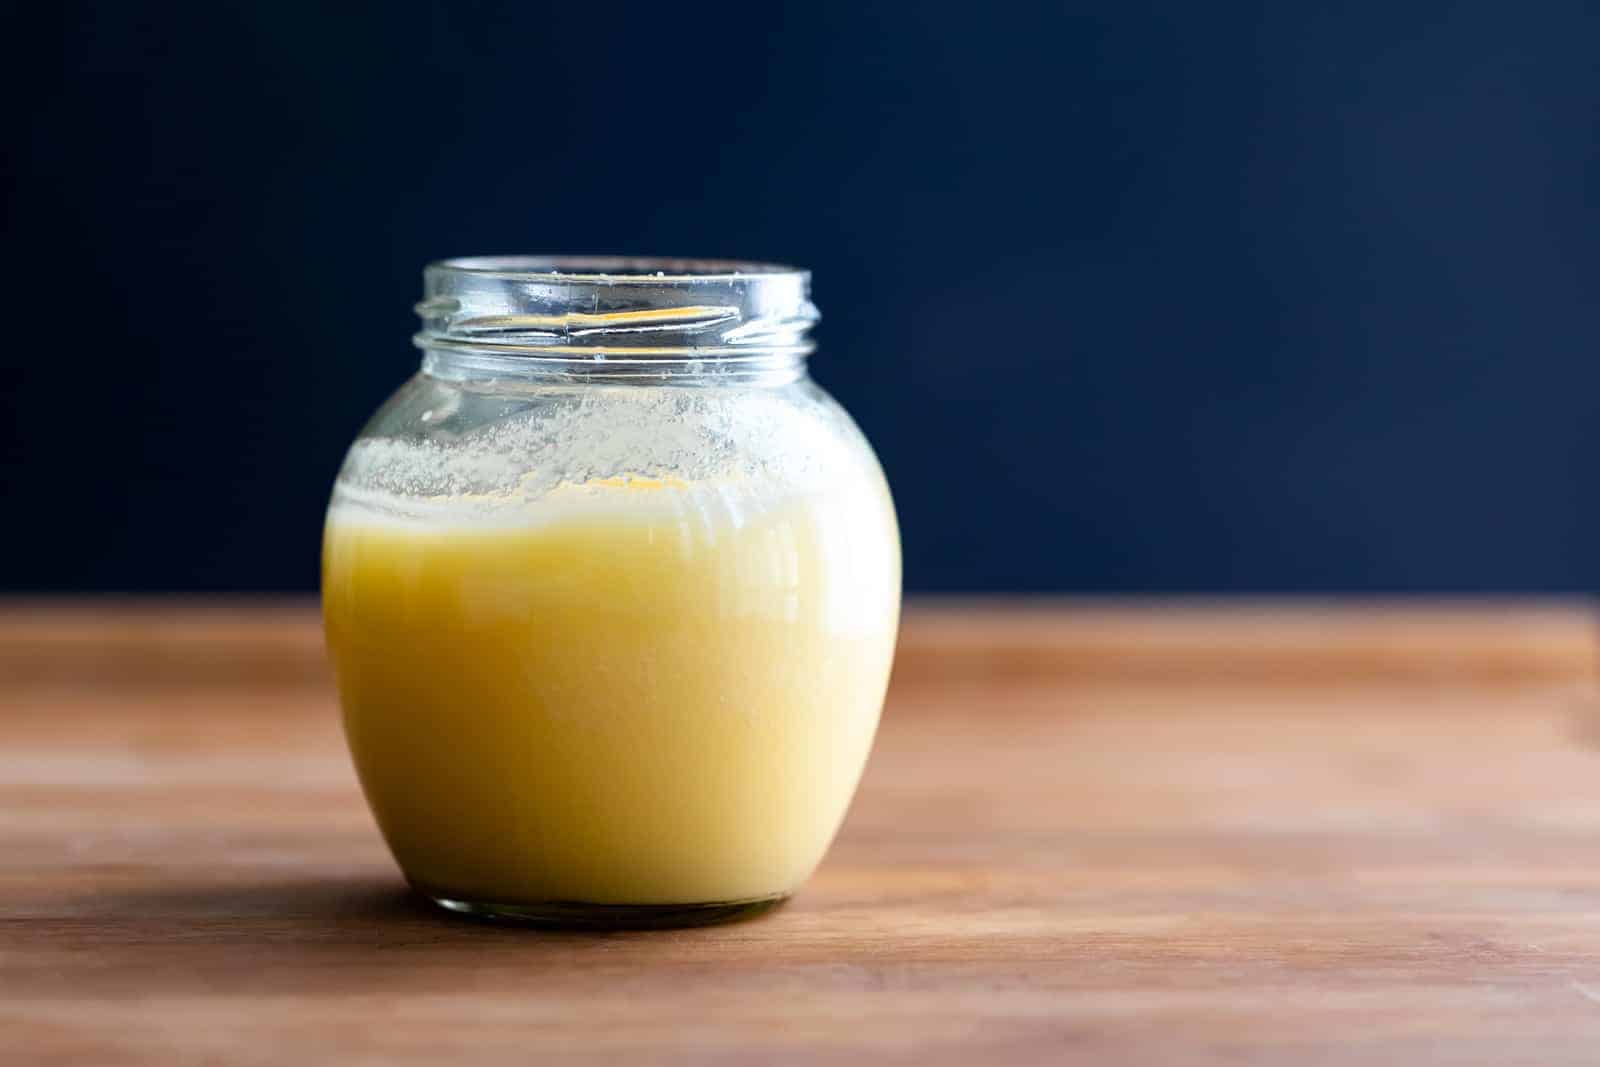 https://myfoodstory.com/wp-content/uploads/2020/01/How-to-make-Ghee-at-home-1.jpg